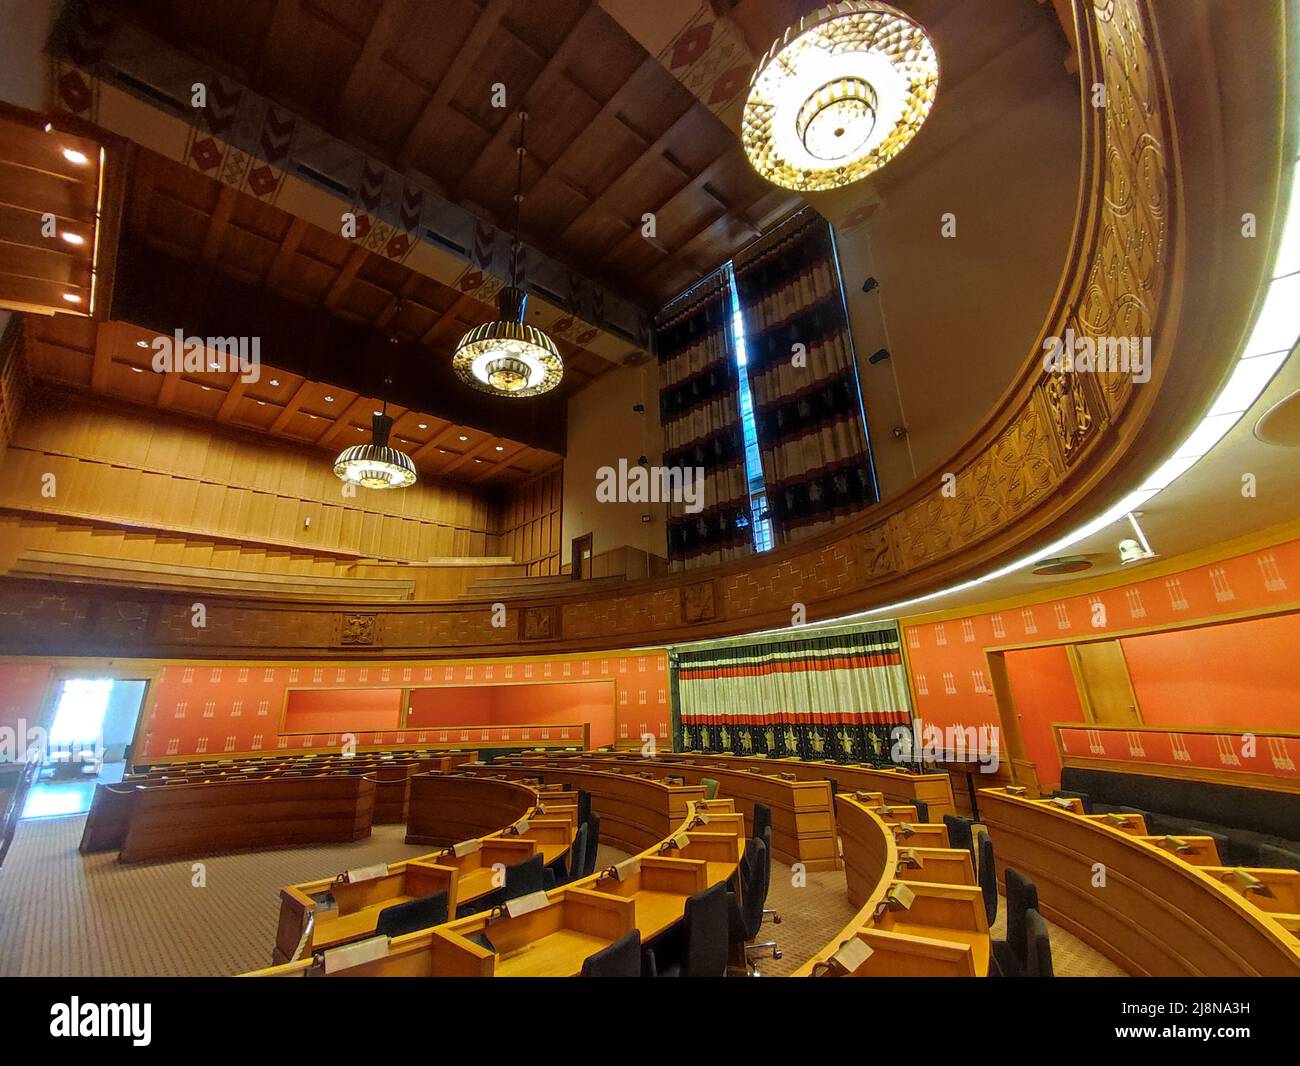 Oslo, Norway - 30 April 2022: The City Council Hall Stock Photo